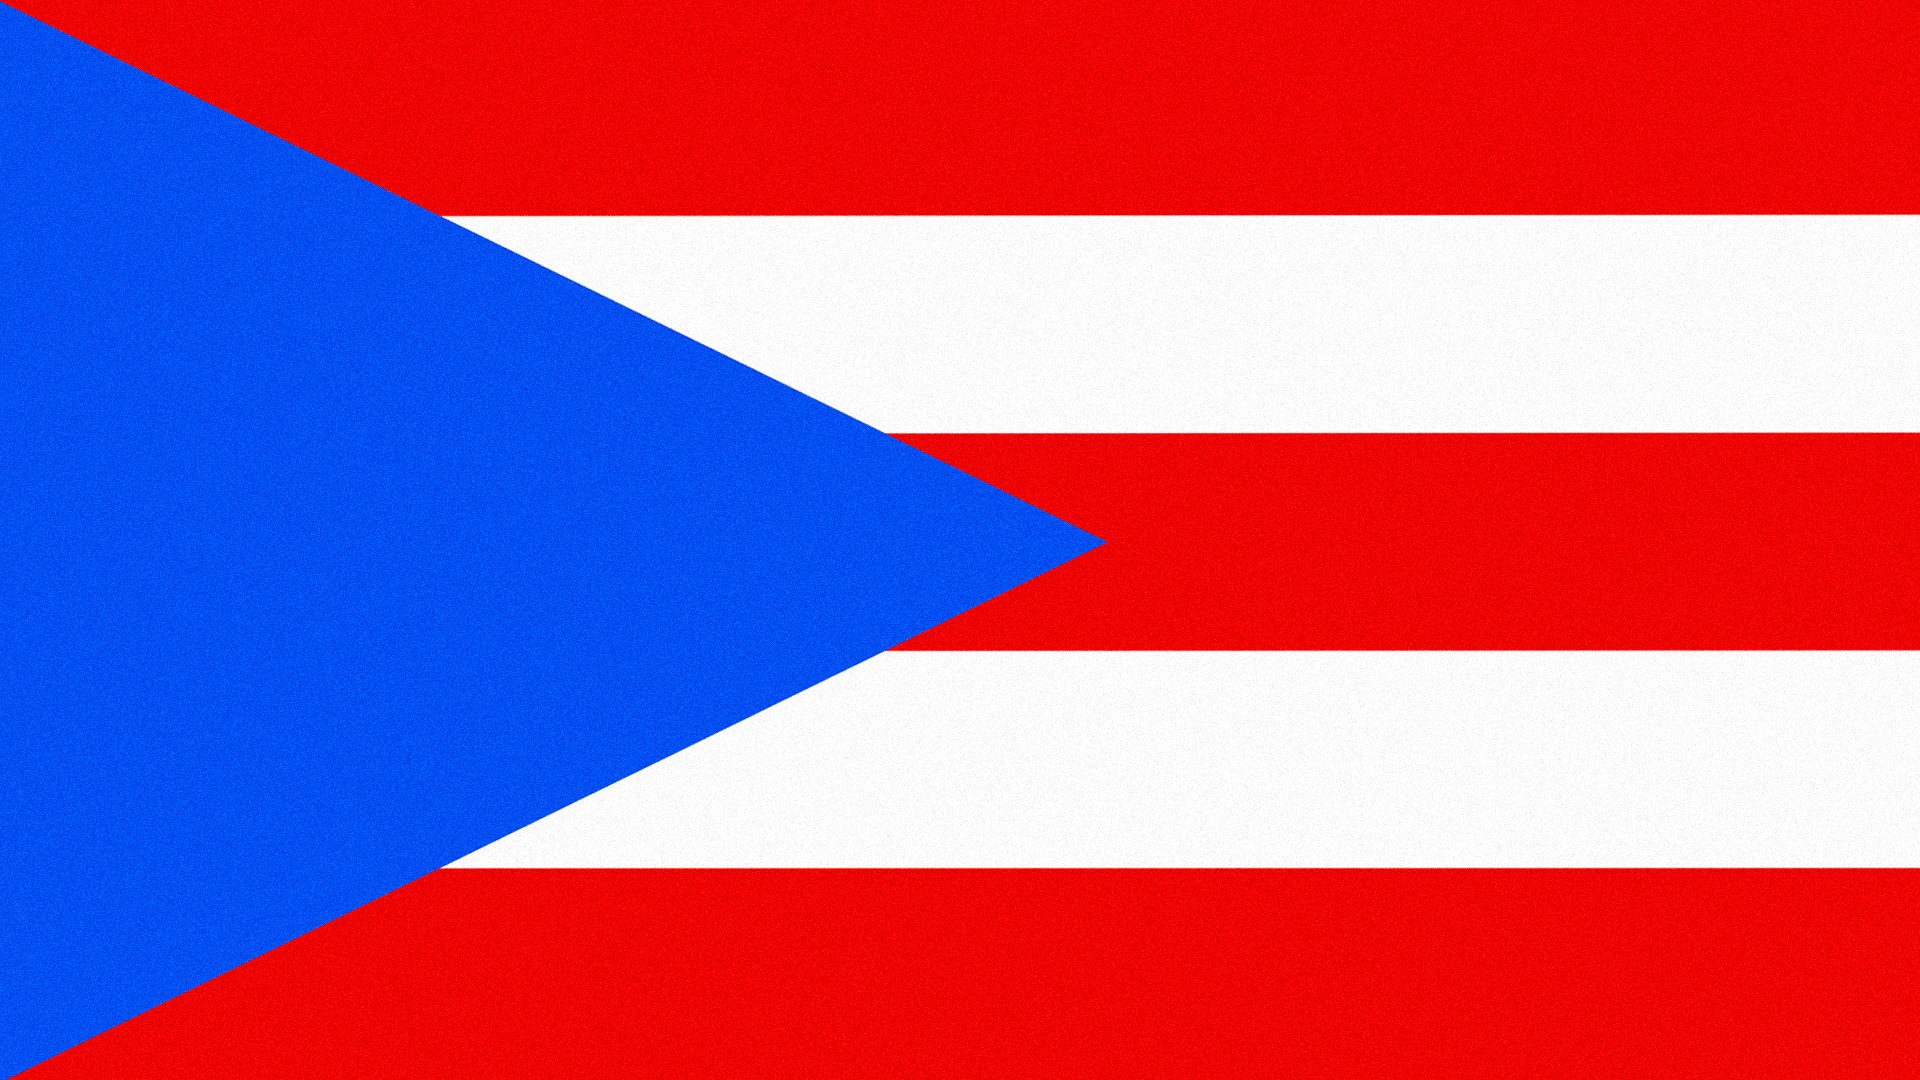 Illustration of the Puerto Rican flag with a wifi symbol struggling to connect to the internet